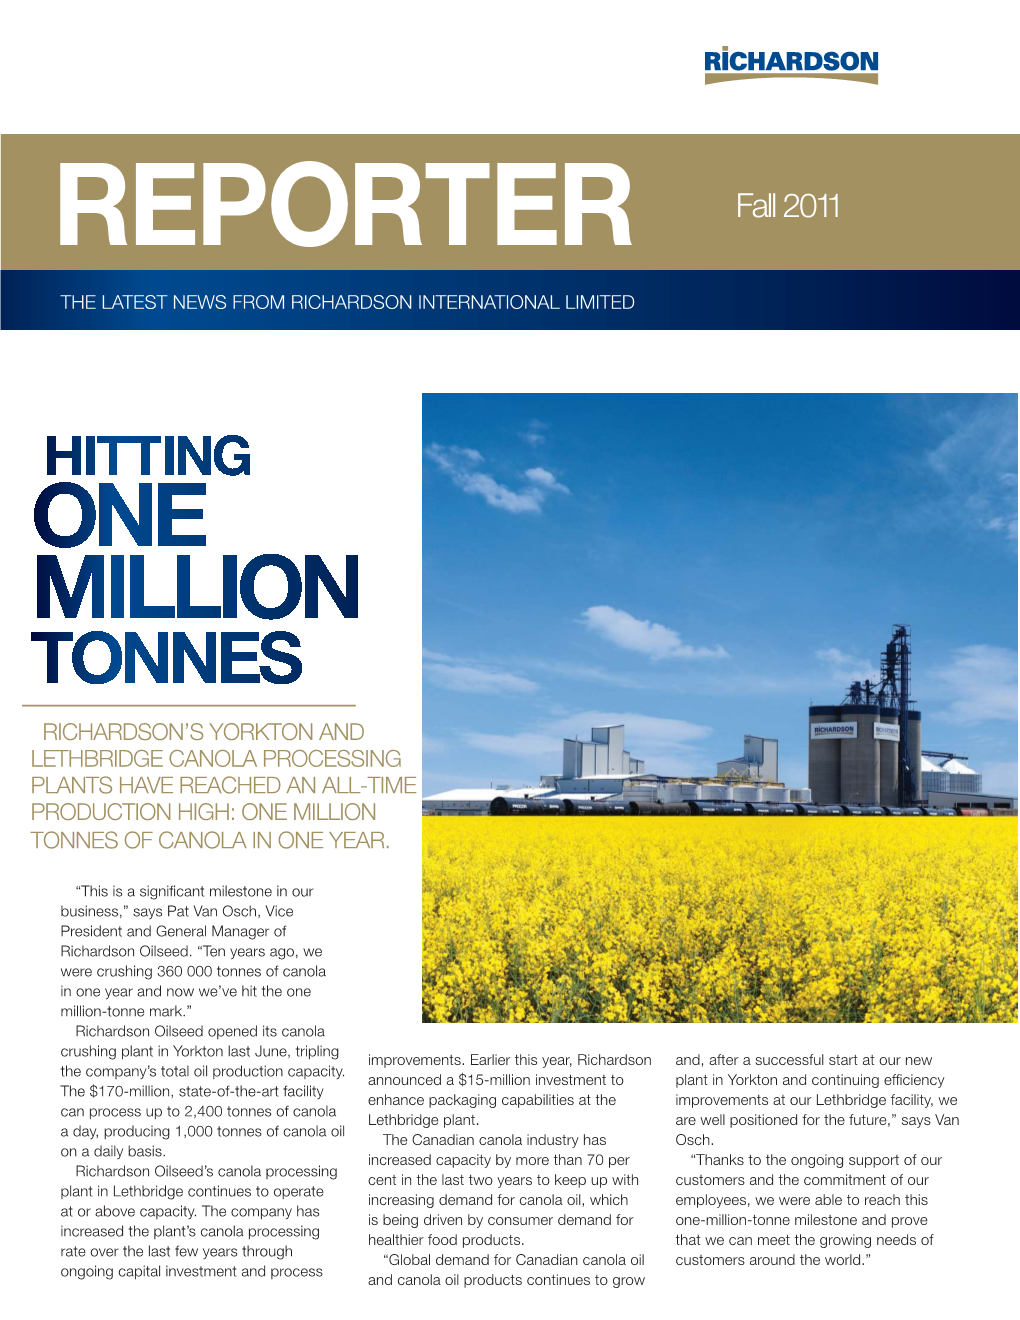 Richardson's Yorkton and Lethbridge Canola Processing Plants Have Reached an All-Time Production High: One Million Tonnes Of